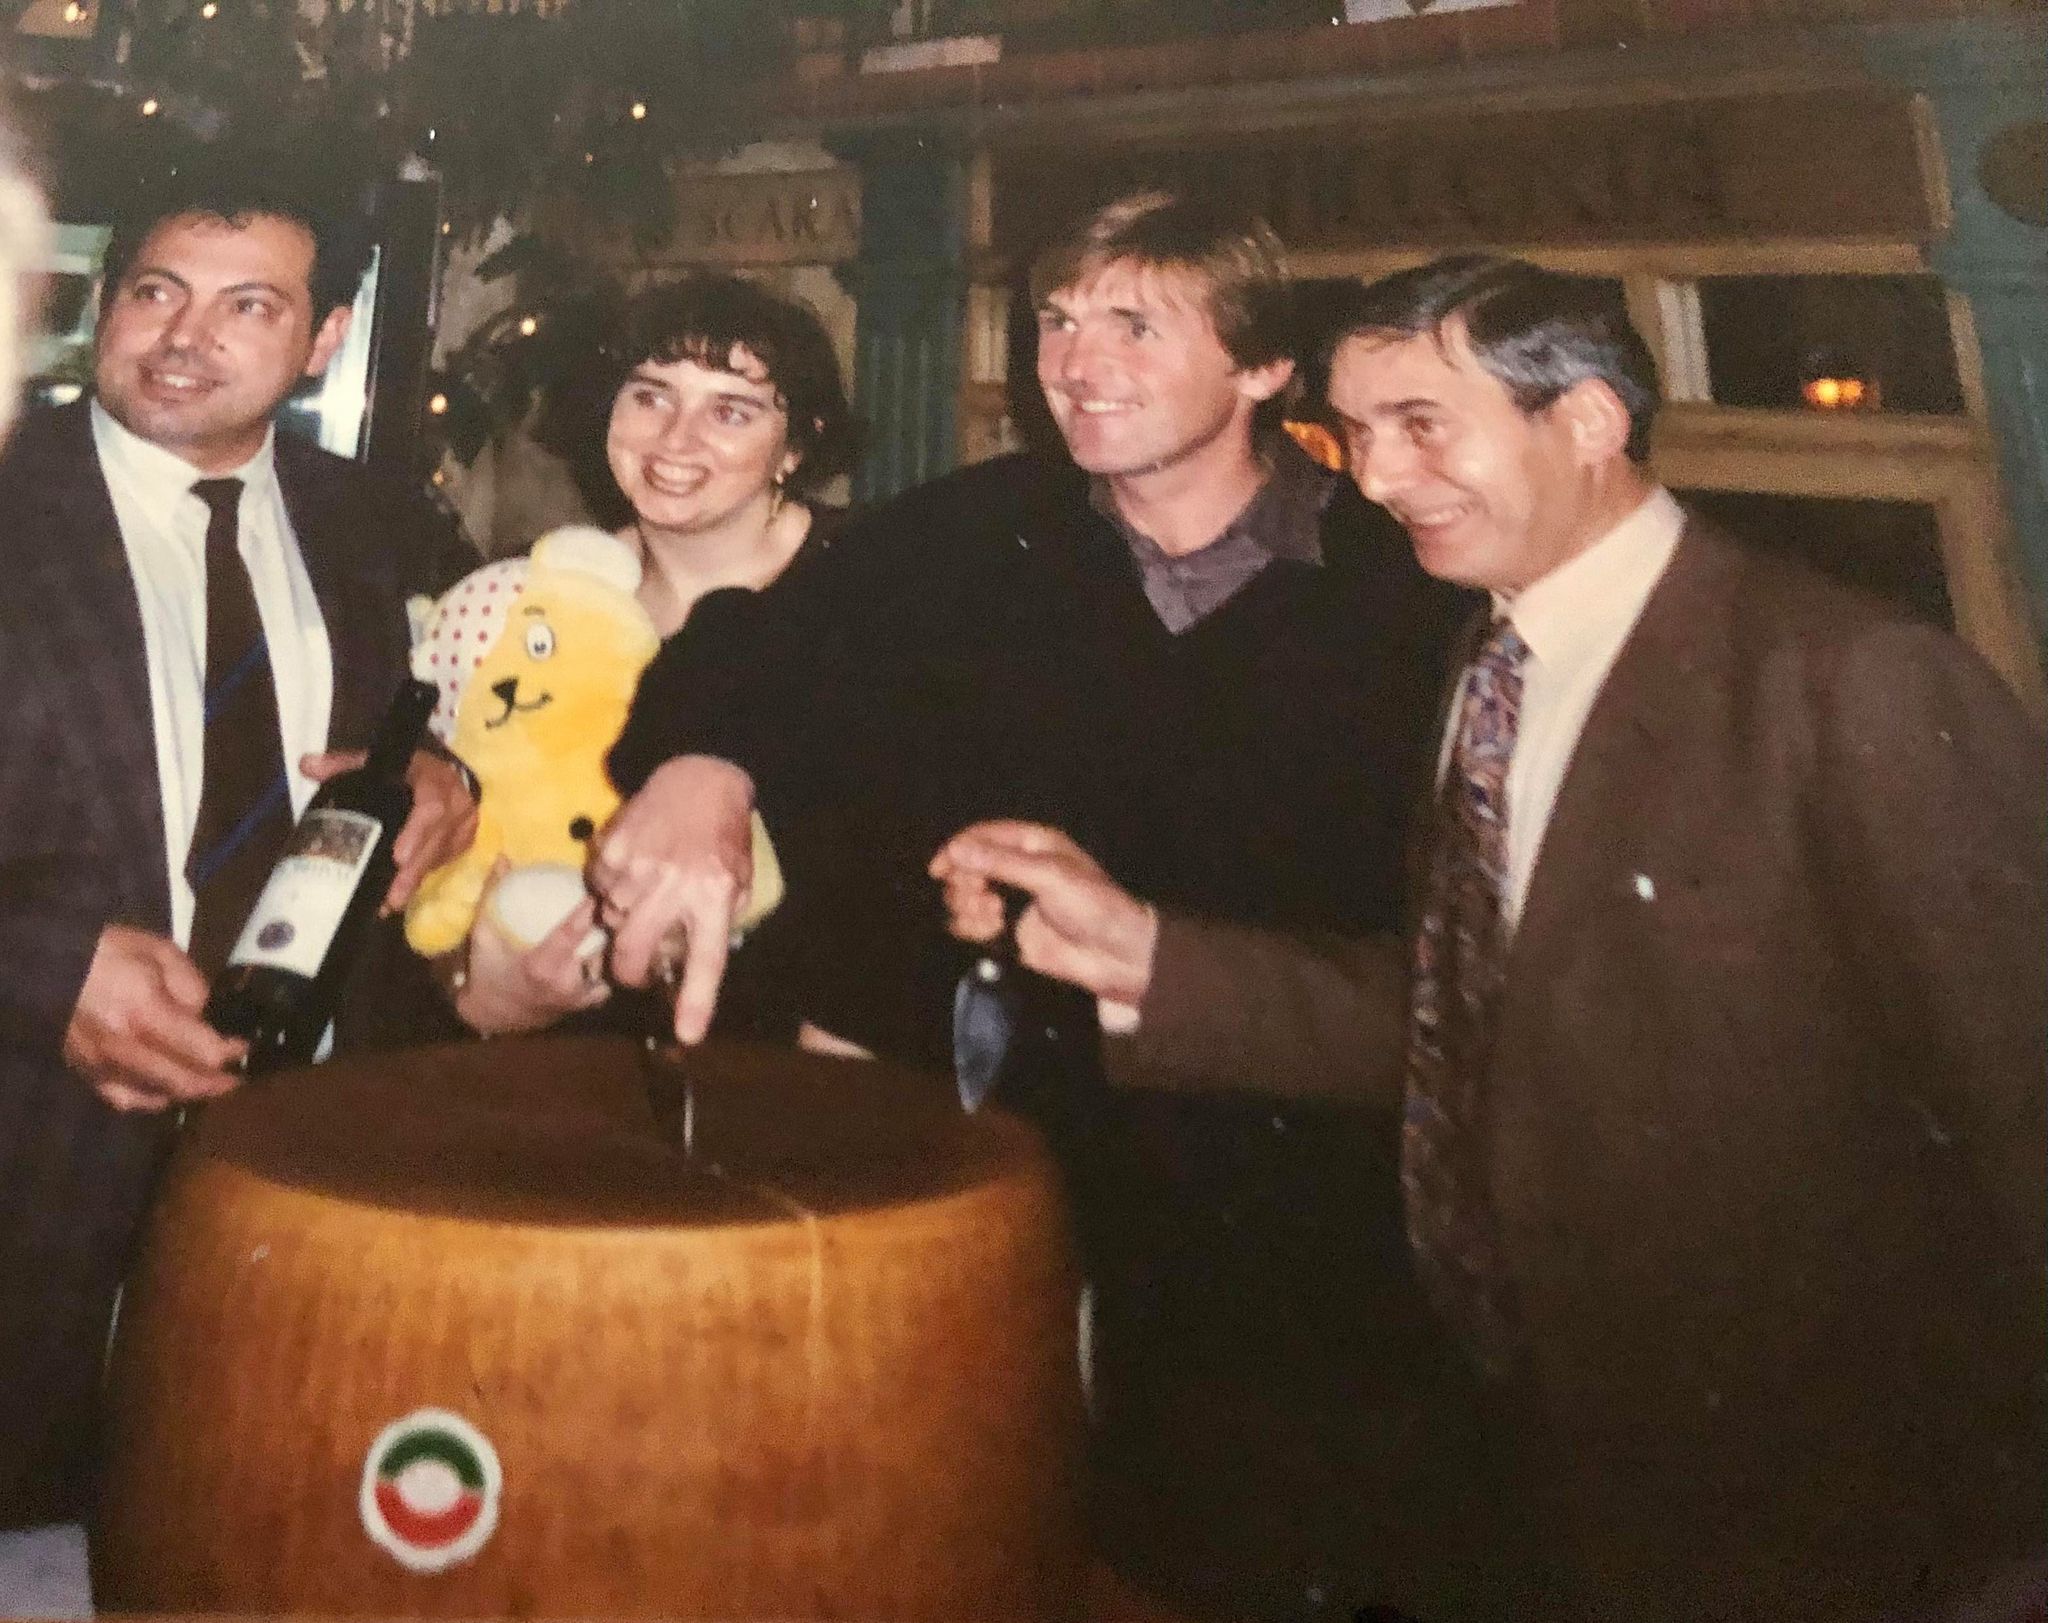 The unveiling of a new Reggiano parmesan cheese wheel at Casa Italia on Lord Street in Southport. Restaurant owner Erasmo Grossi (right) with Liverpool FC star Kenny Dalglish (third left) with Giovanna Grossi and her partner Mario